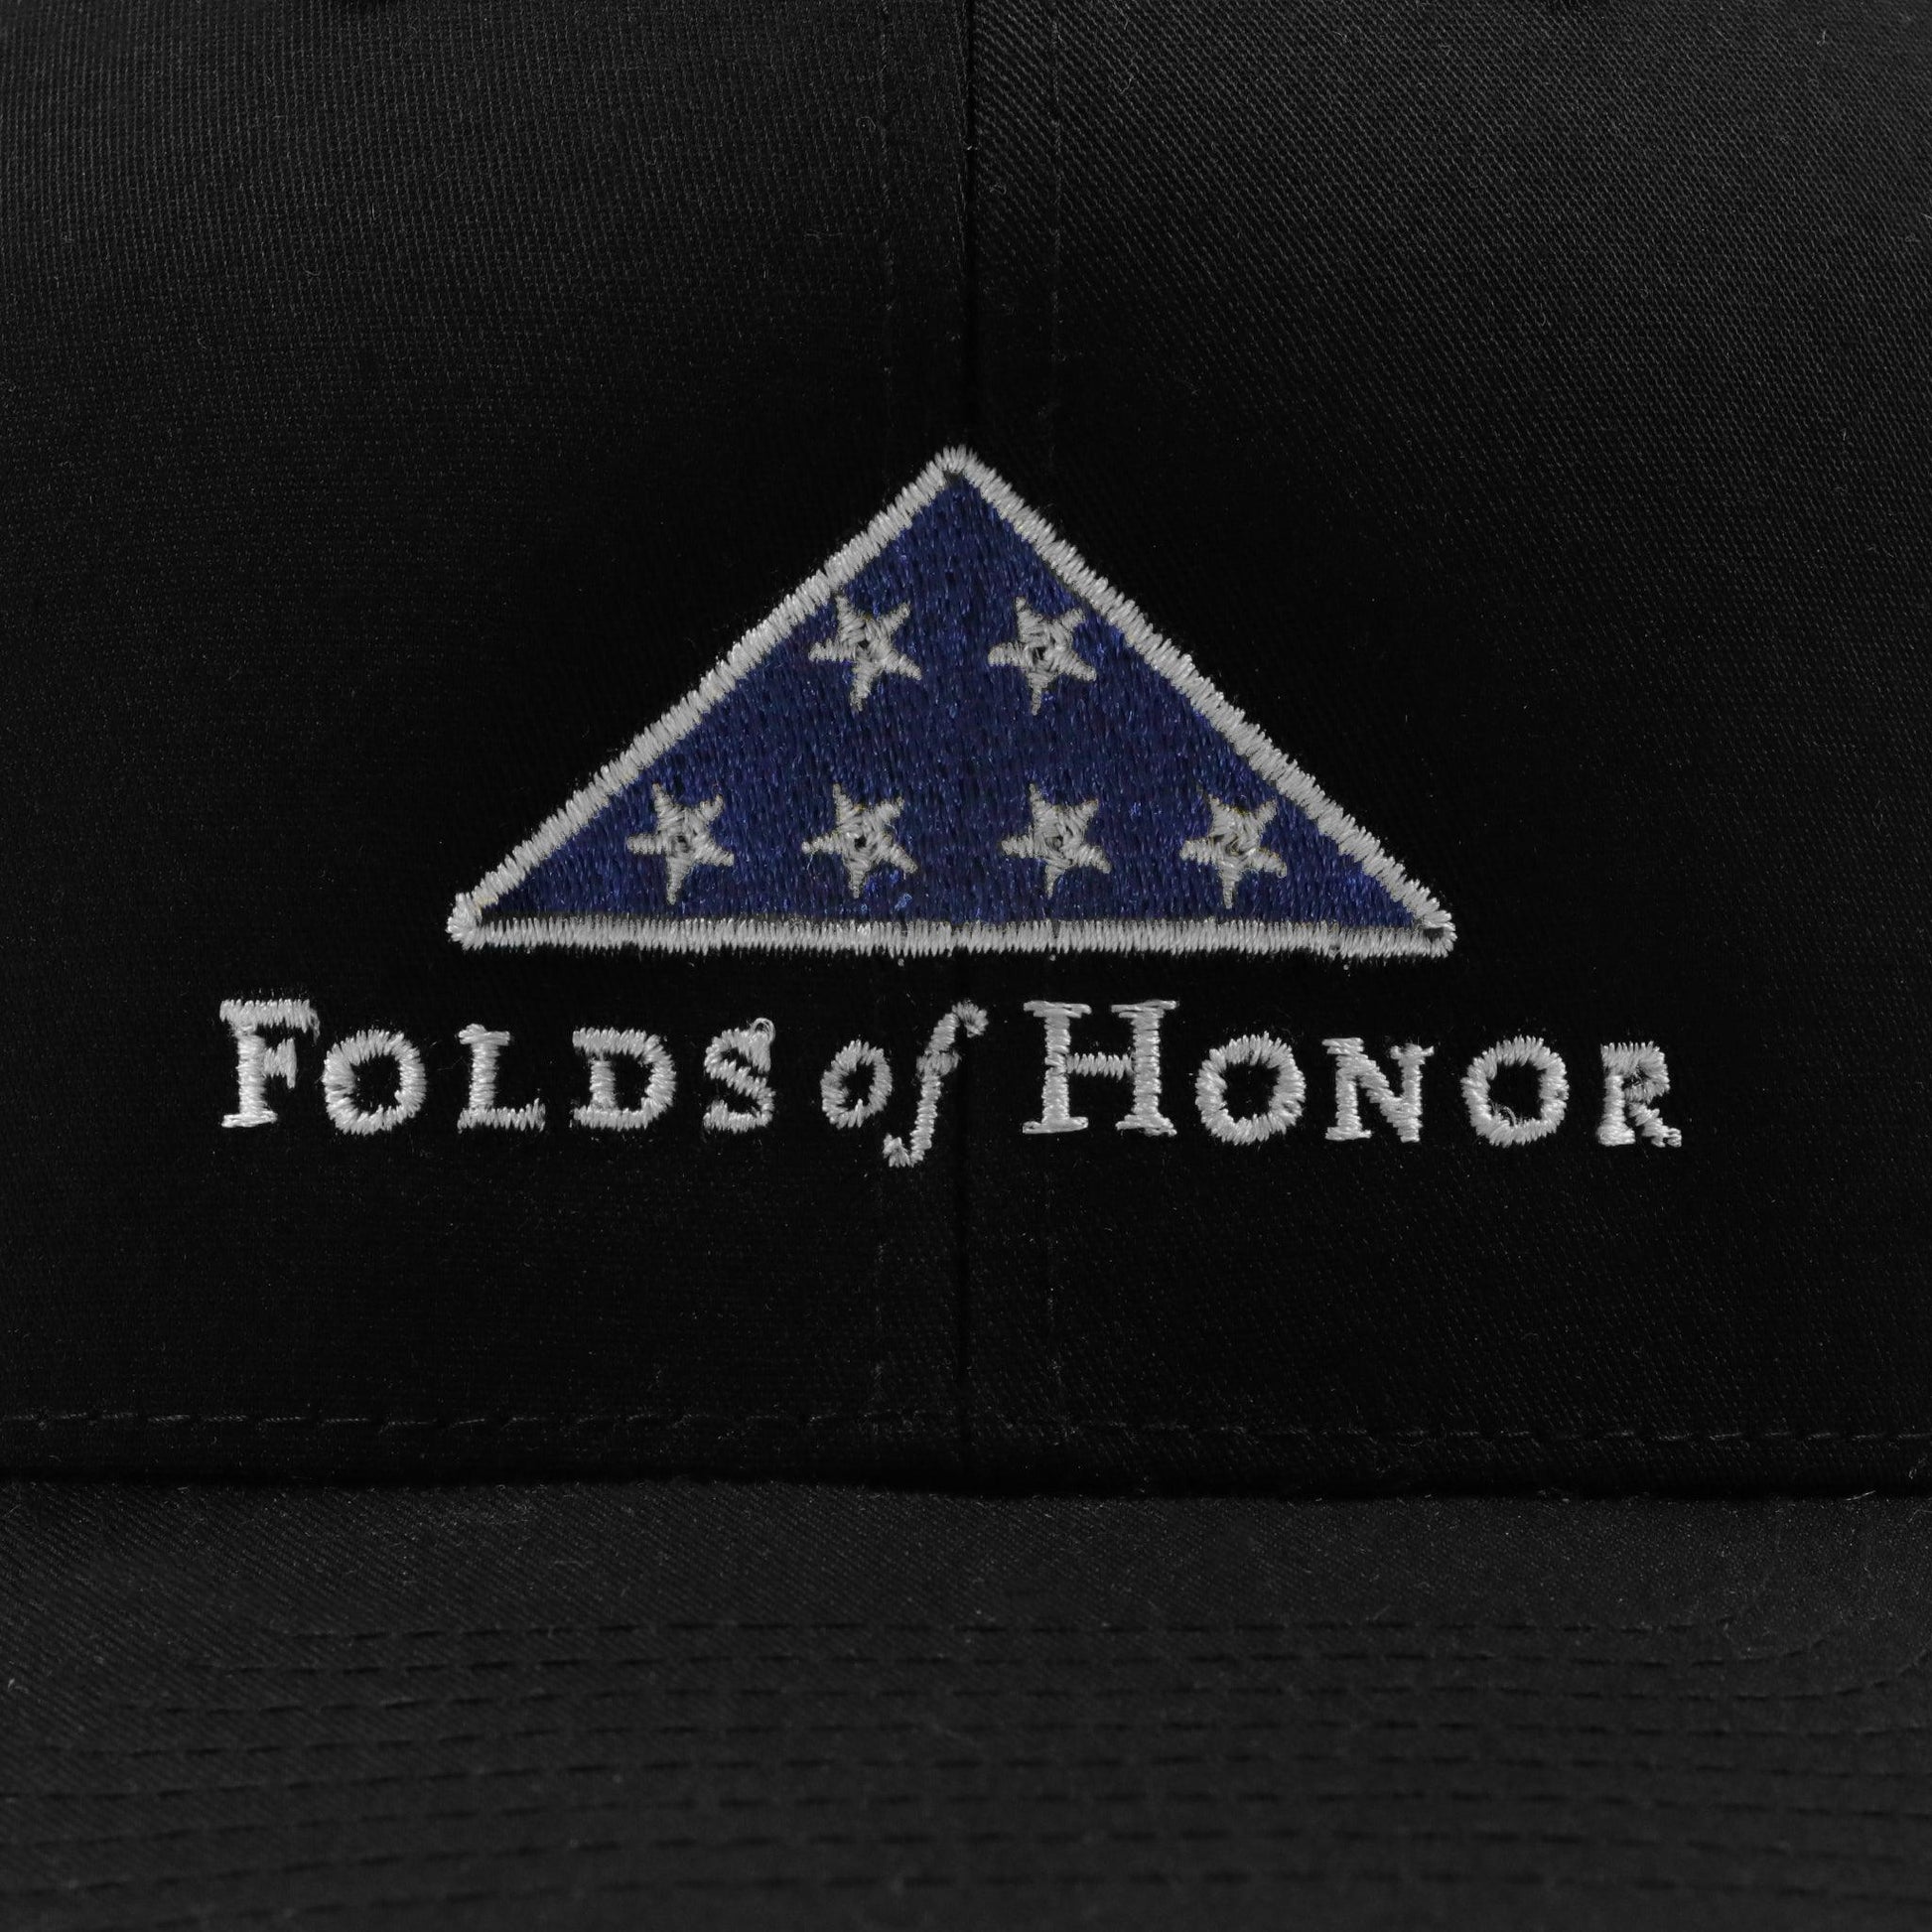 CLOSE UP OF FOLDS OF HONOR EMBROIDERY ON FRONT OF HAT